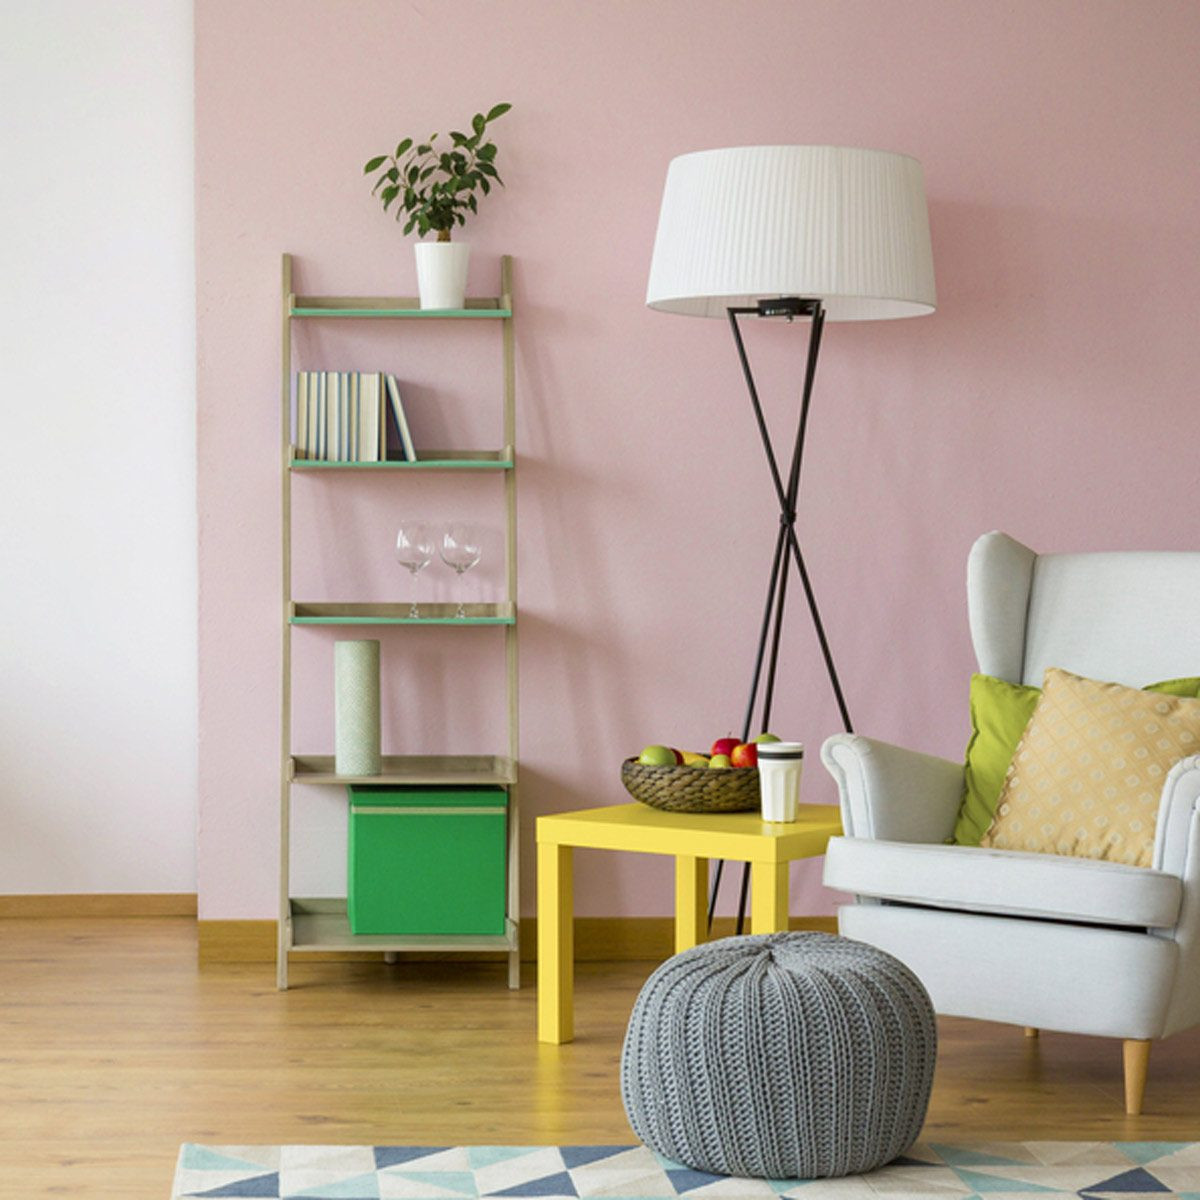 Painting Living Room Ideas
 13 Great Paint Ideas for Your Living Room — The Family